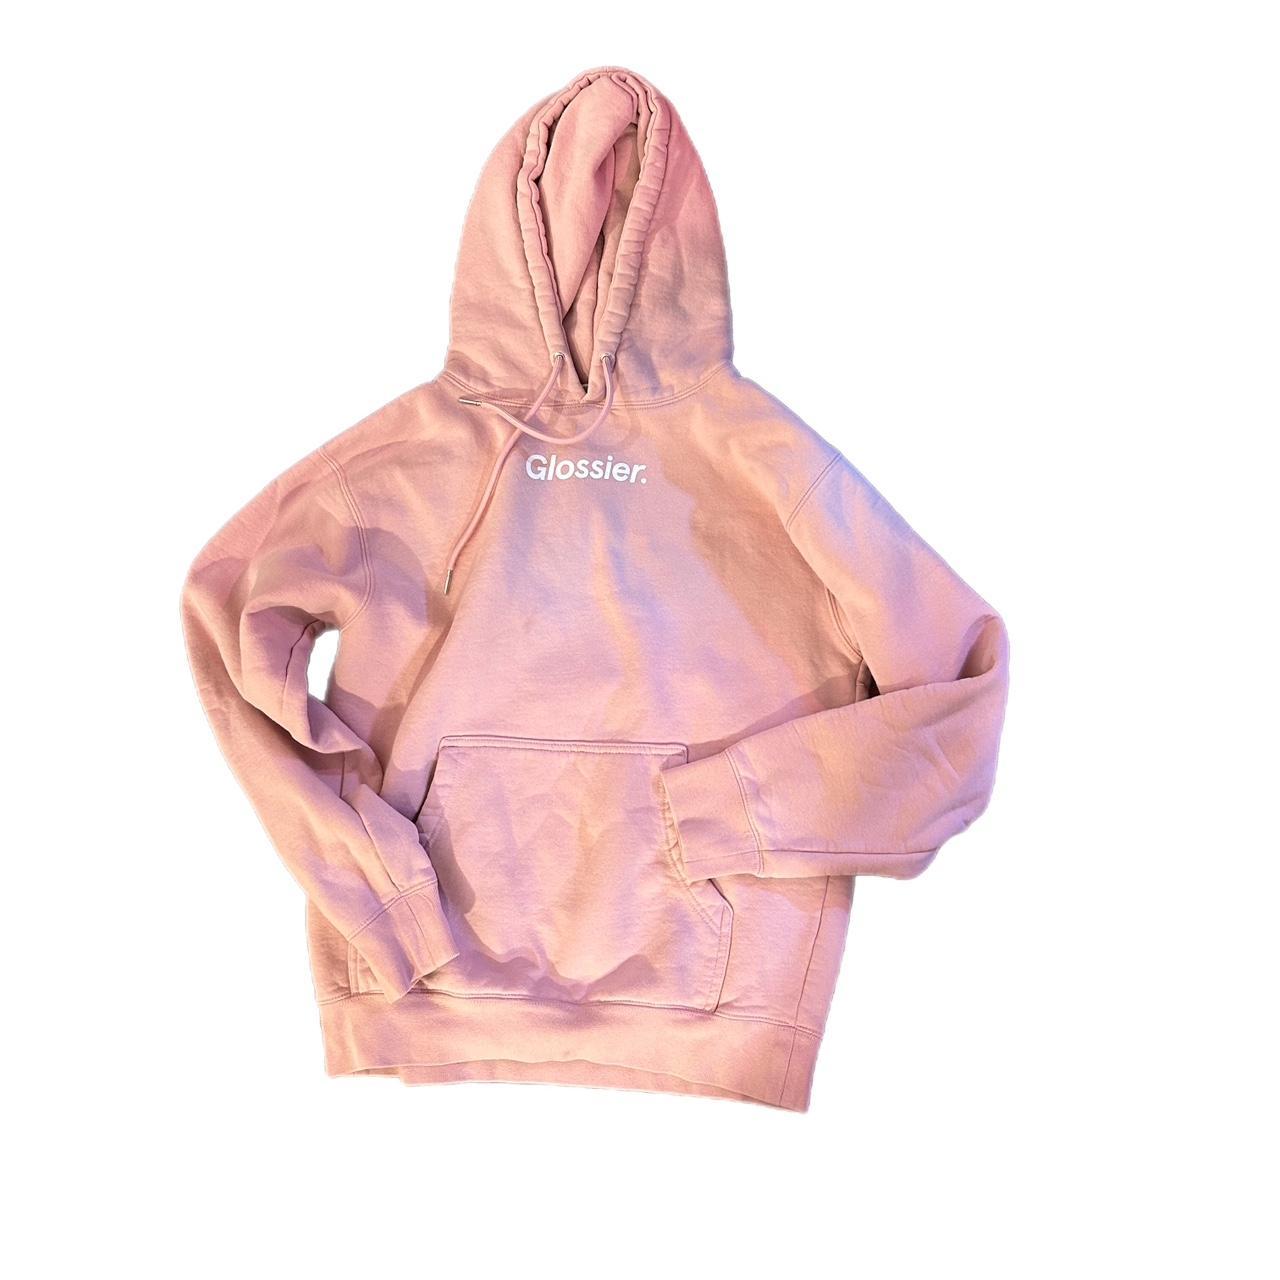 pink glossier hoodie small paint spot pictured - Depop